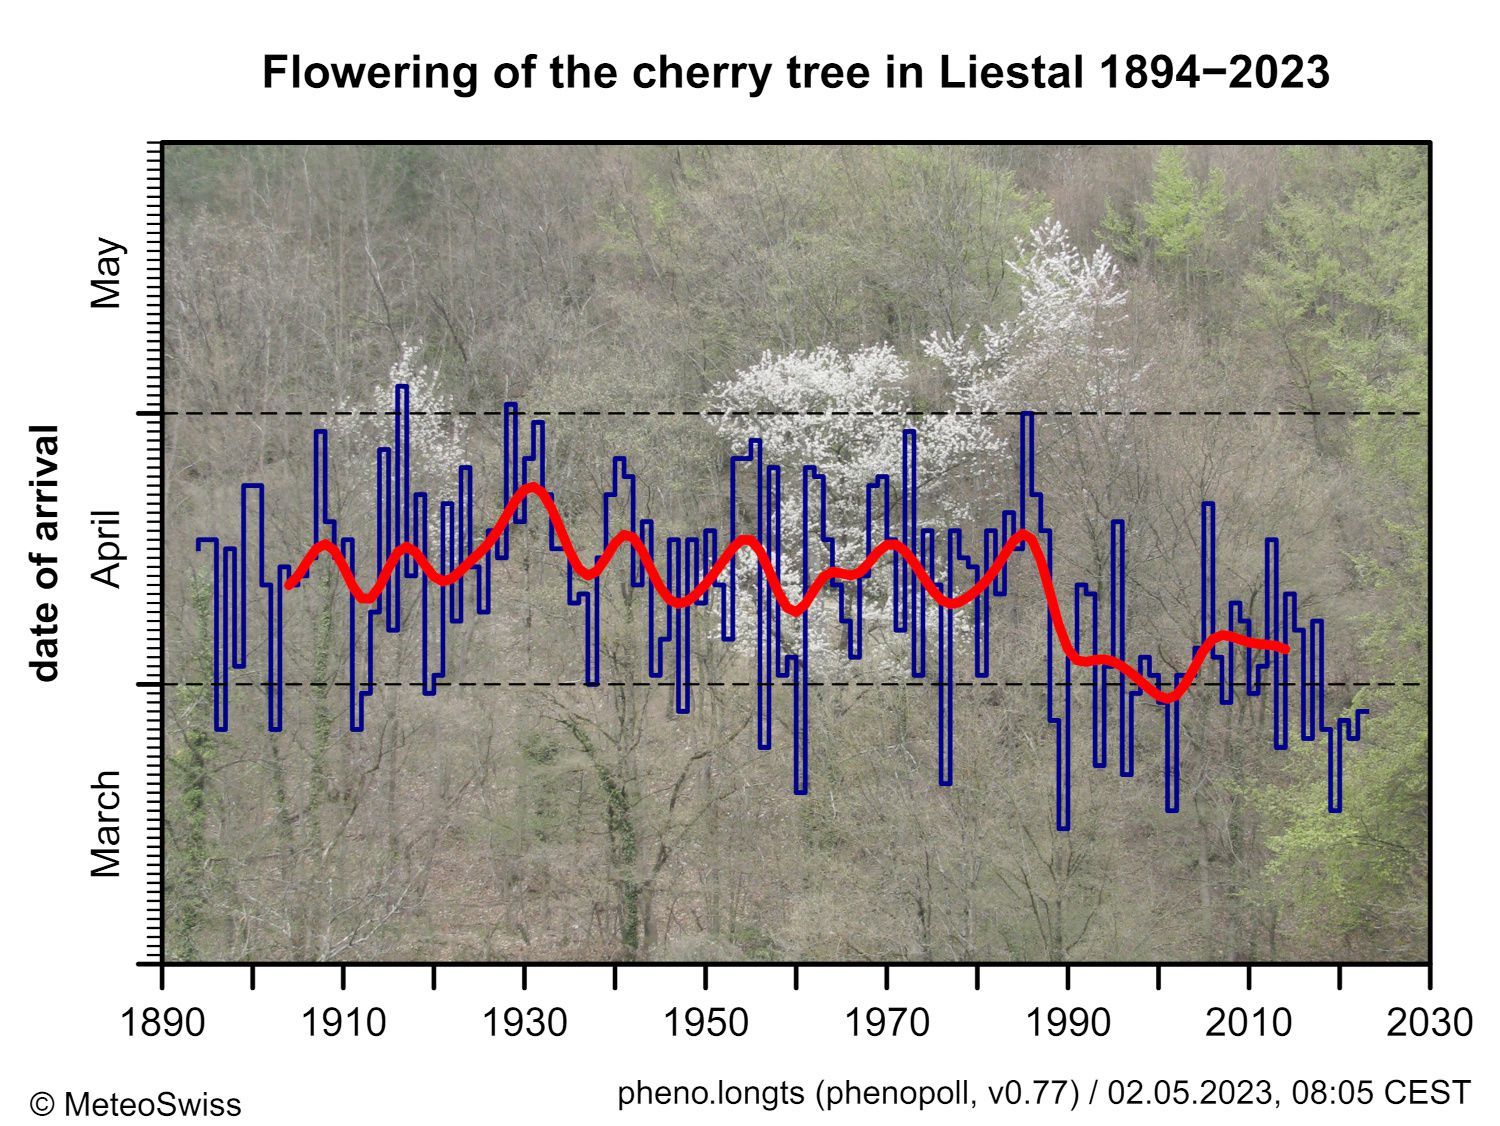 Blooming of the cherry tree in Liestal-Weideli since 1894. The red line shows the 20-year weighted average (Gaussian low-pass filter). Data source: Landw. Zentrum Ebenrain, Sissach and MeteoSwiss.